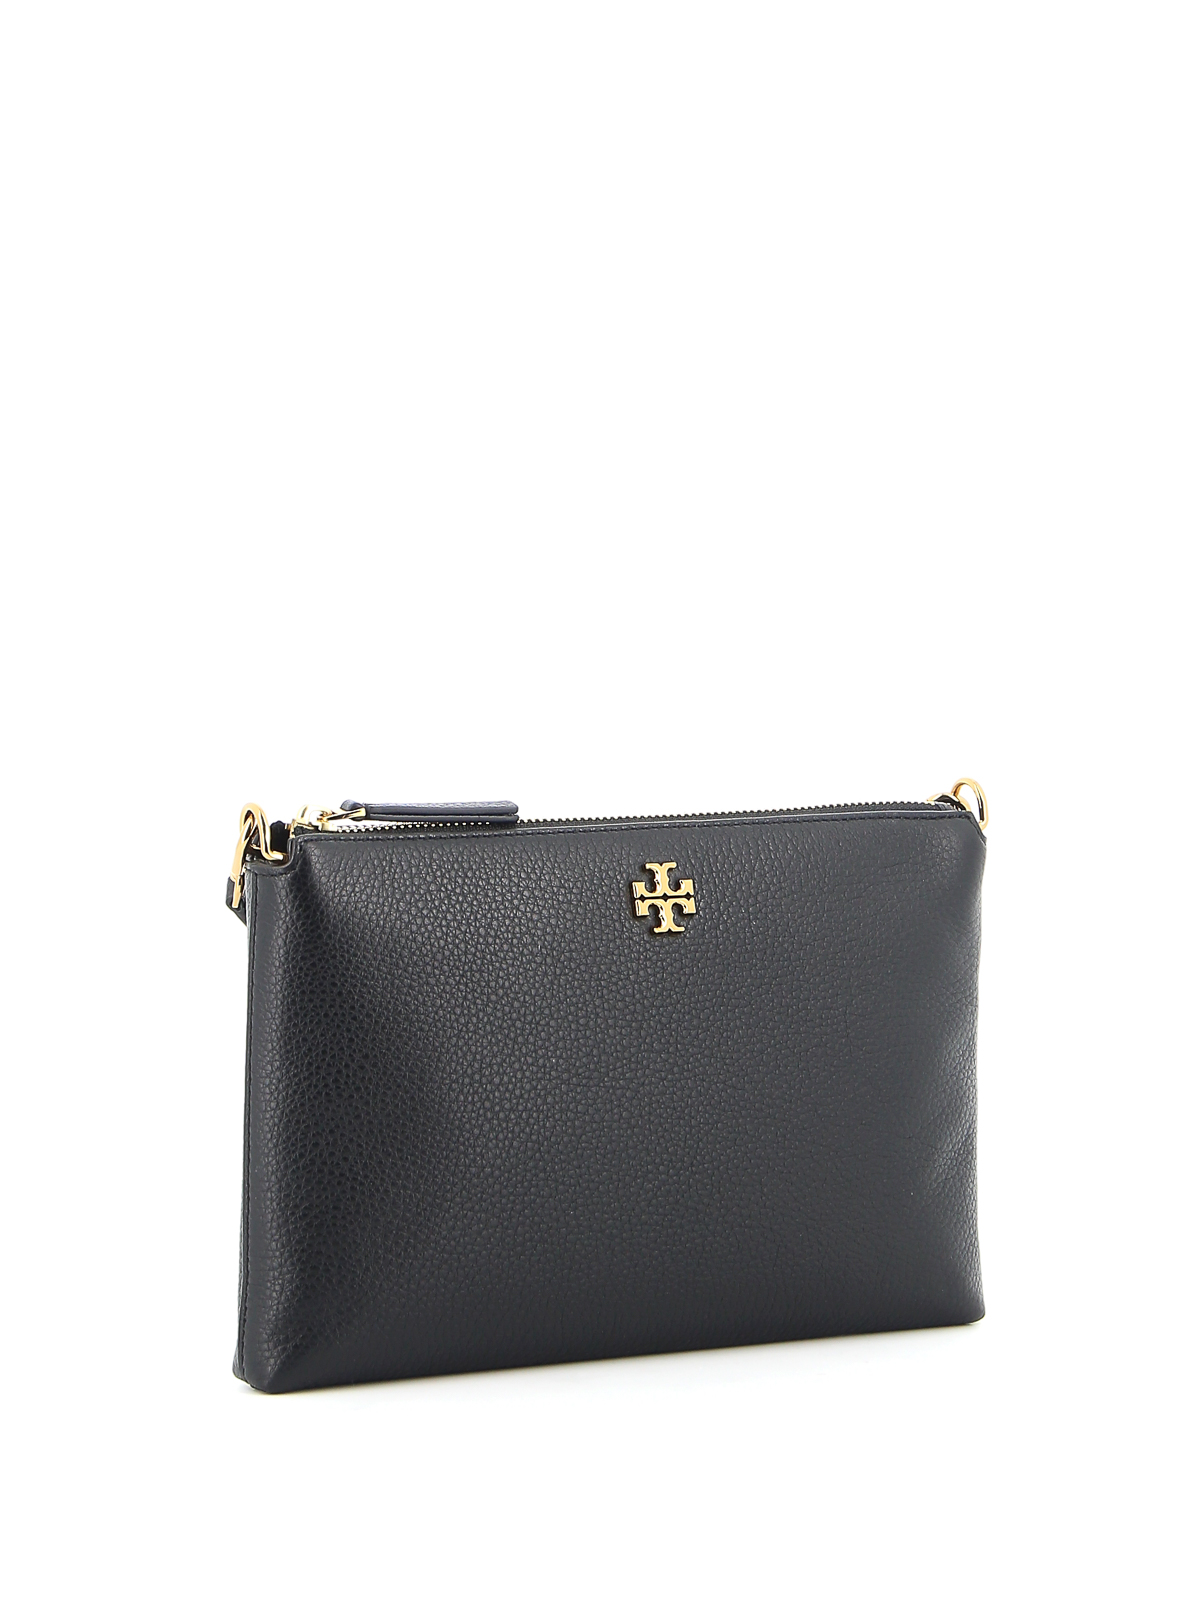 Clutches Tory Burch - Kira pebbled leather clutch - 61385001 